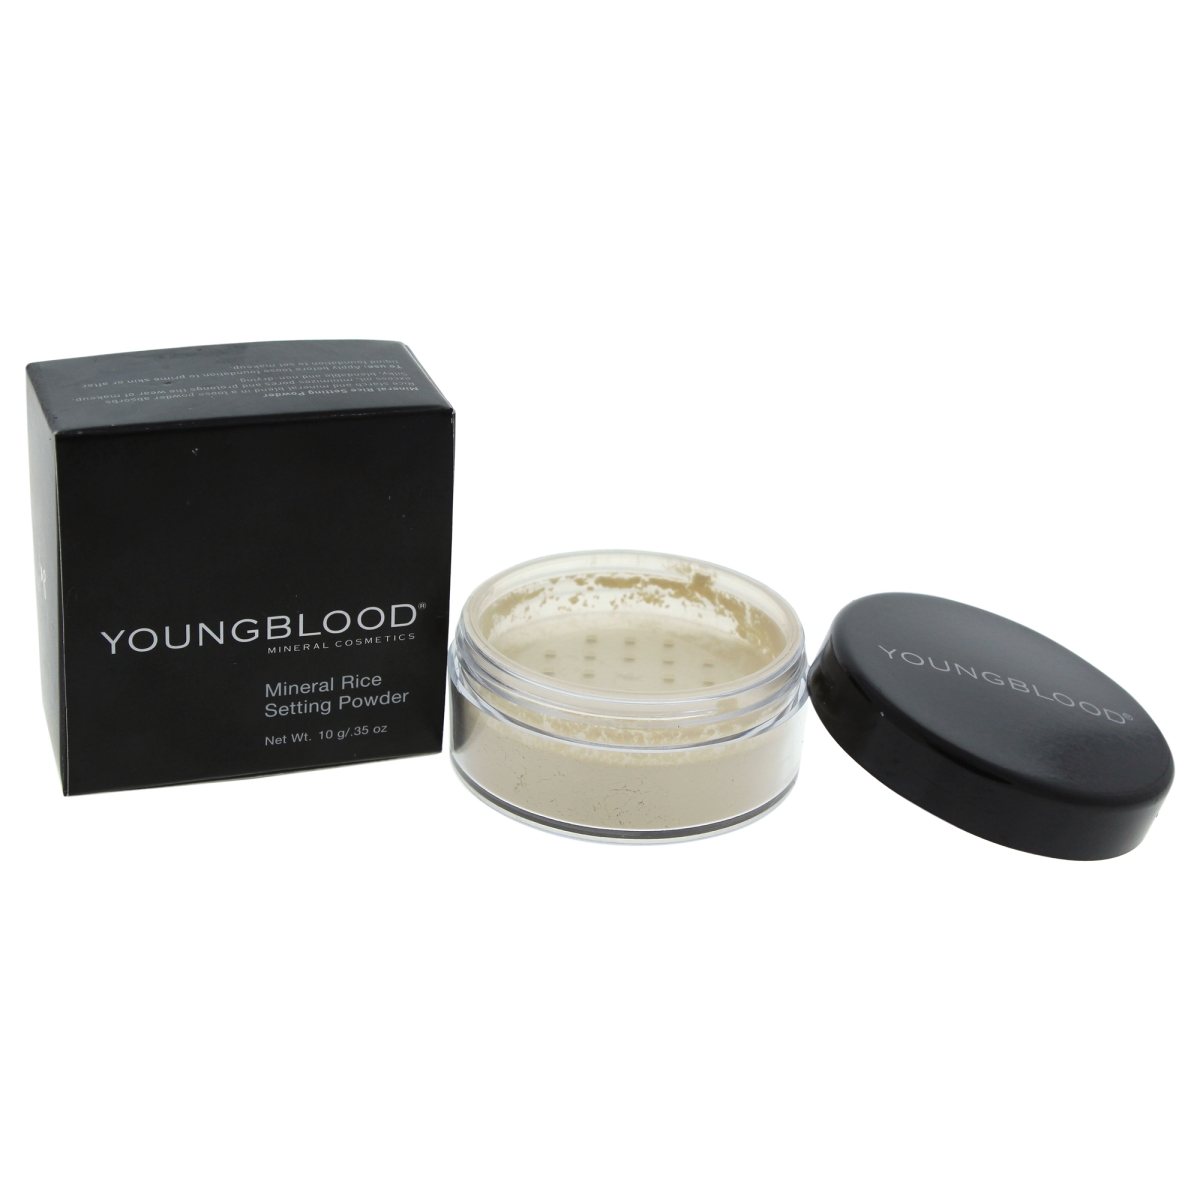 Picture of Youngblood W-C-12028 0.35 oz Mineral Rice Setting Powder for Women, Light